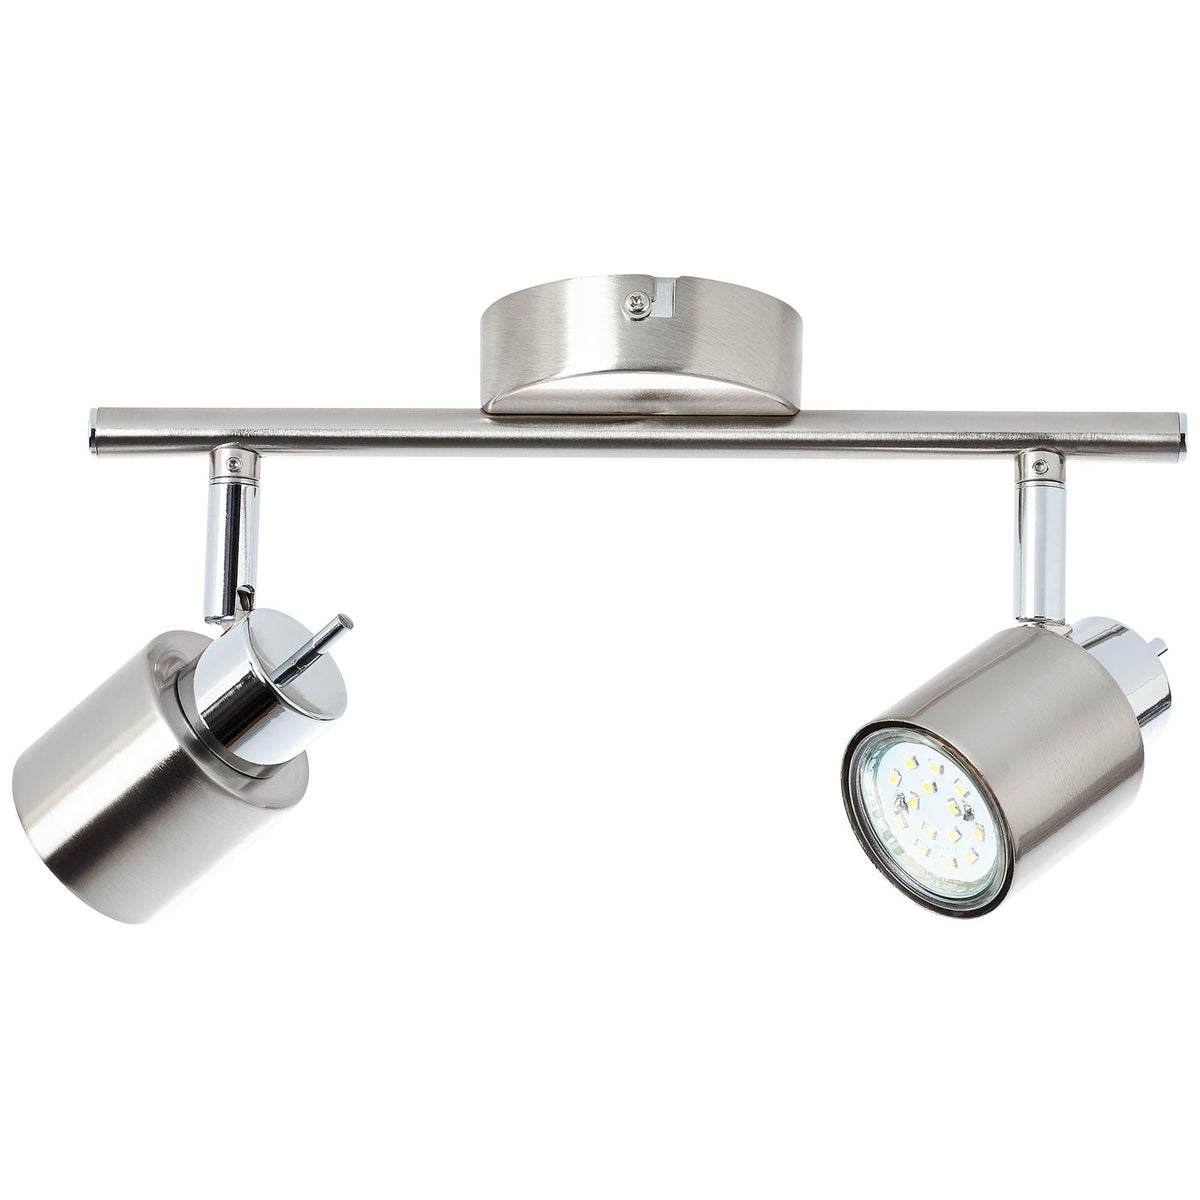 Brilliant 2 Light 20W Andres Spotlight - Chrome | 74513/77 from DID Electrical - guaranteed Irish, guaranteed quality service. (6977594359996)